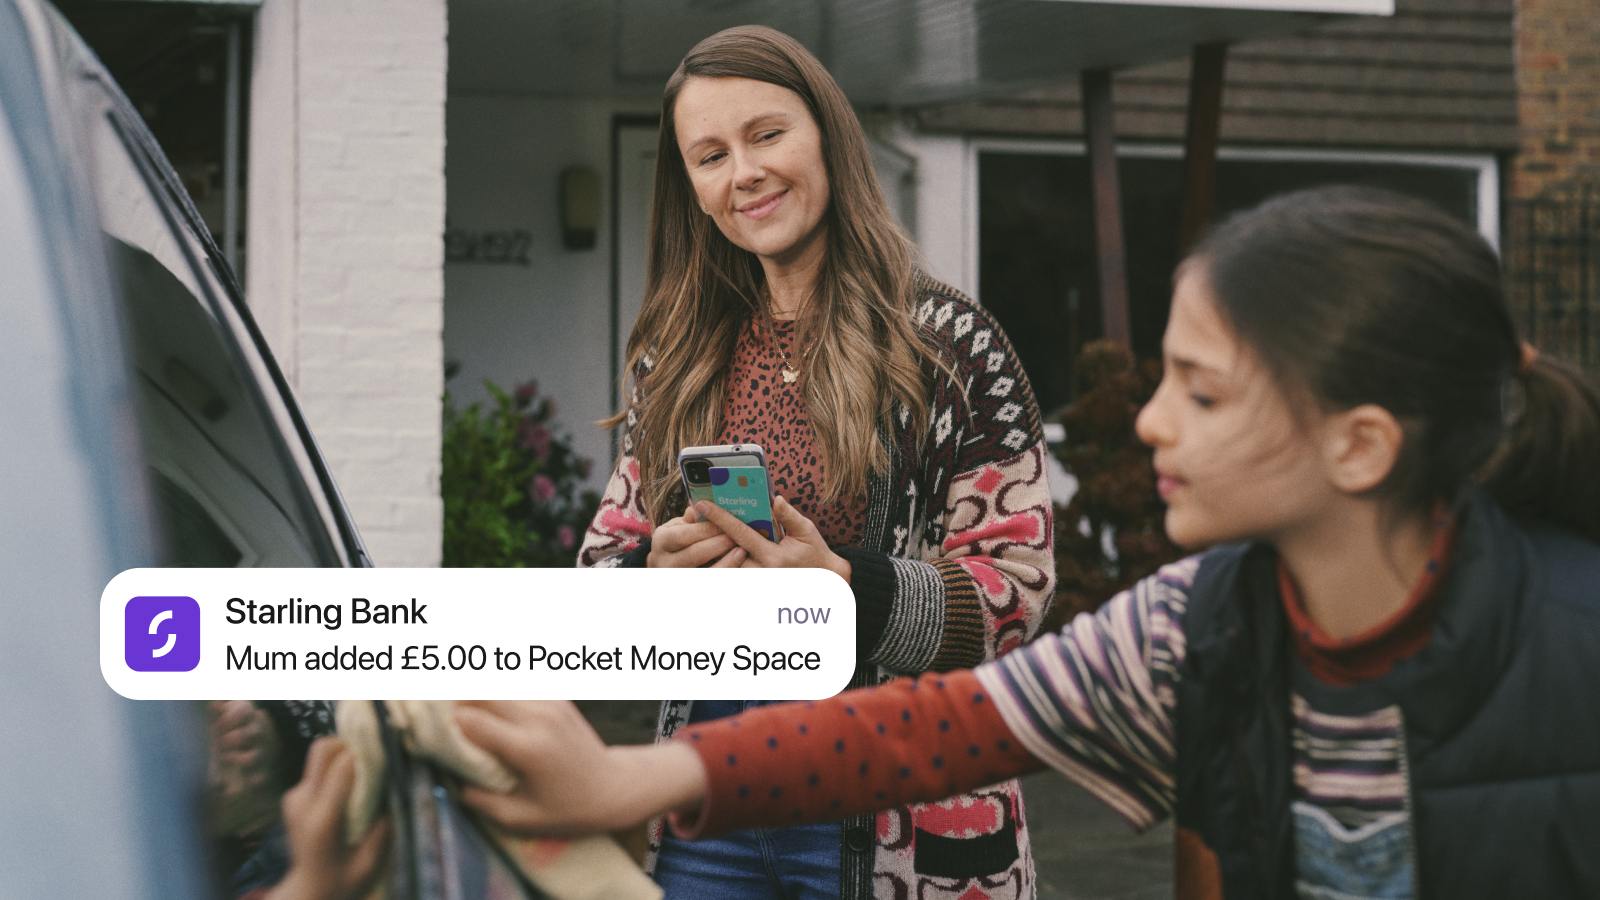 A woman holds a phone and stands next to a child. Notification on a screen from Starling Bank: "Mum added £5.00 to Pocket Money Space